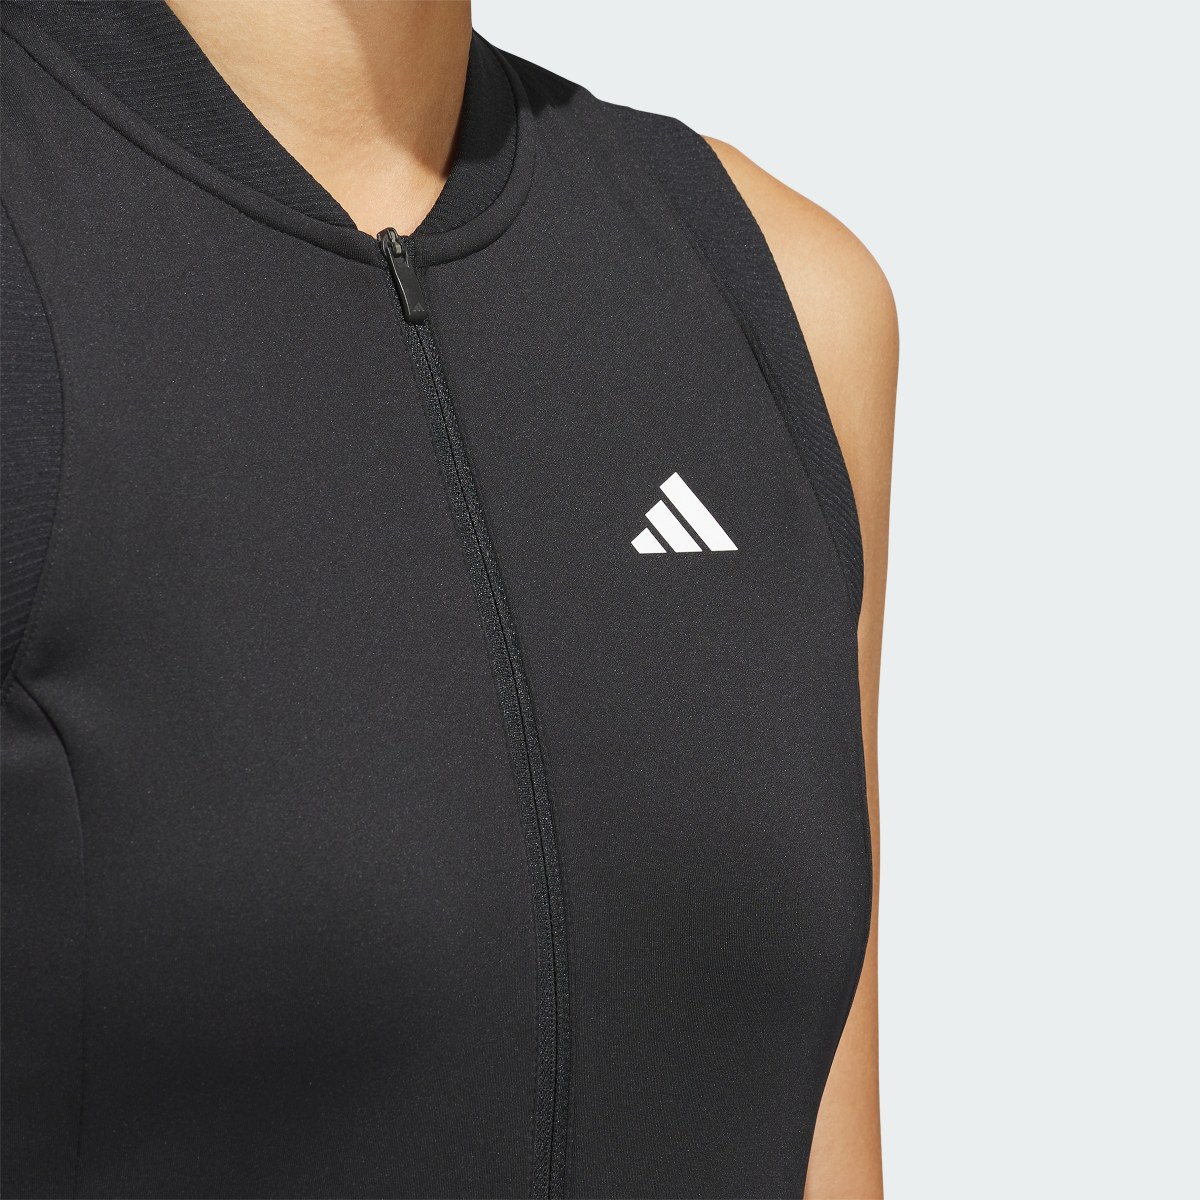 Adidas Robe sans manches Ultimate365 Femmes. 9